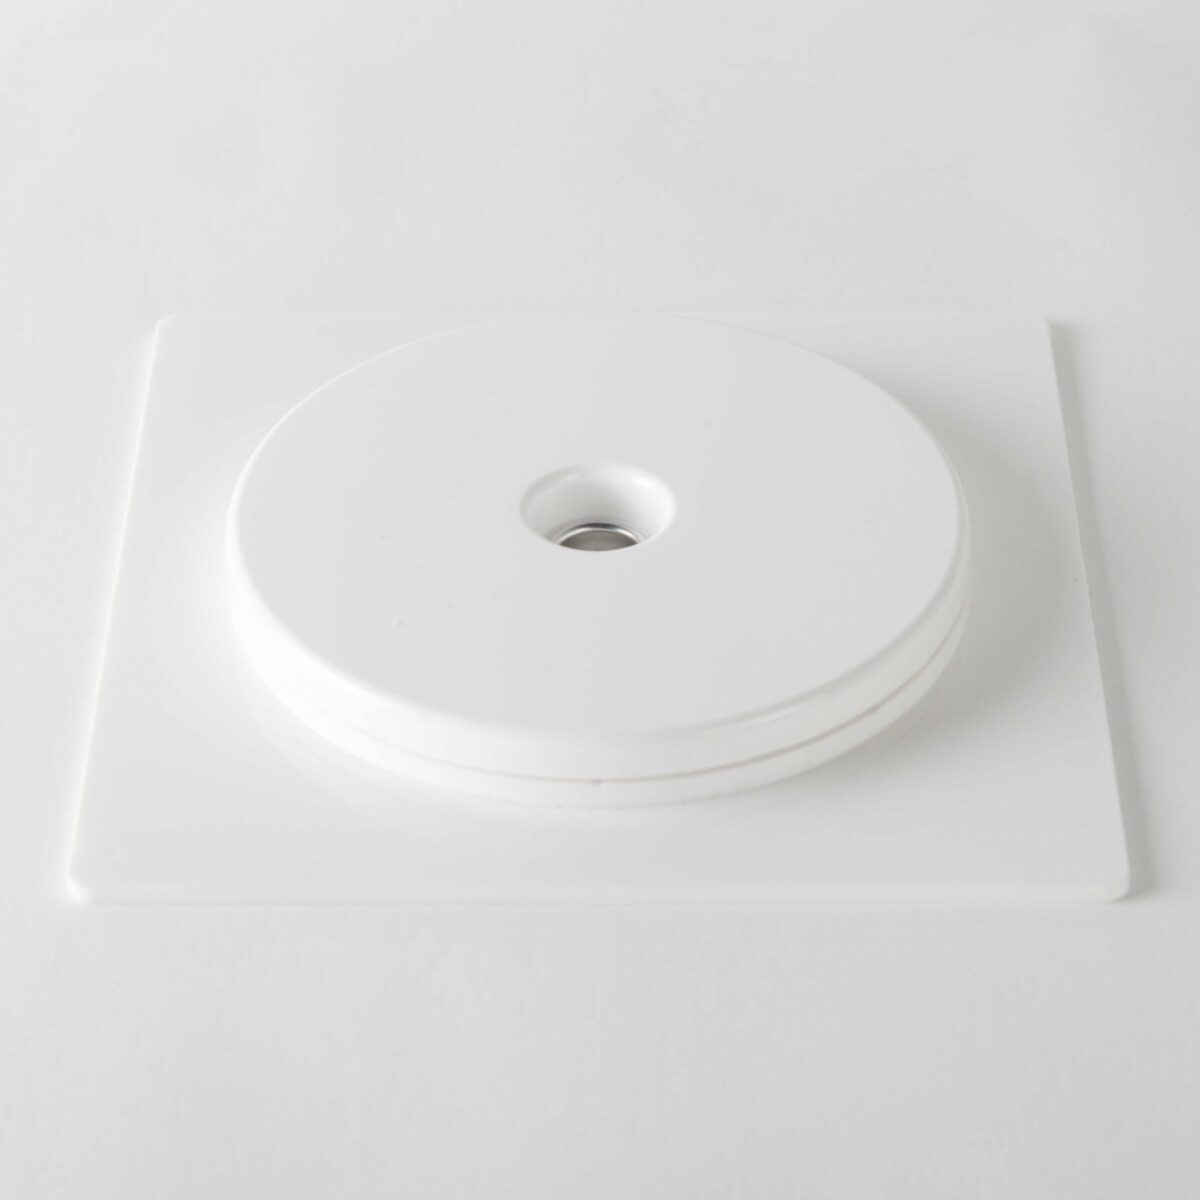 Unpowered Turntable Square Top 108 mm (4.25")